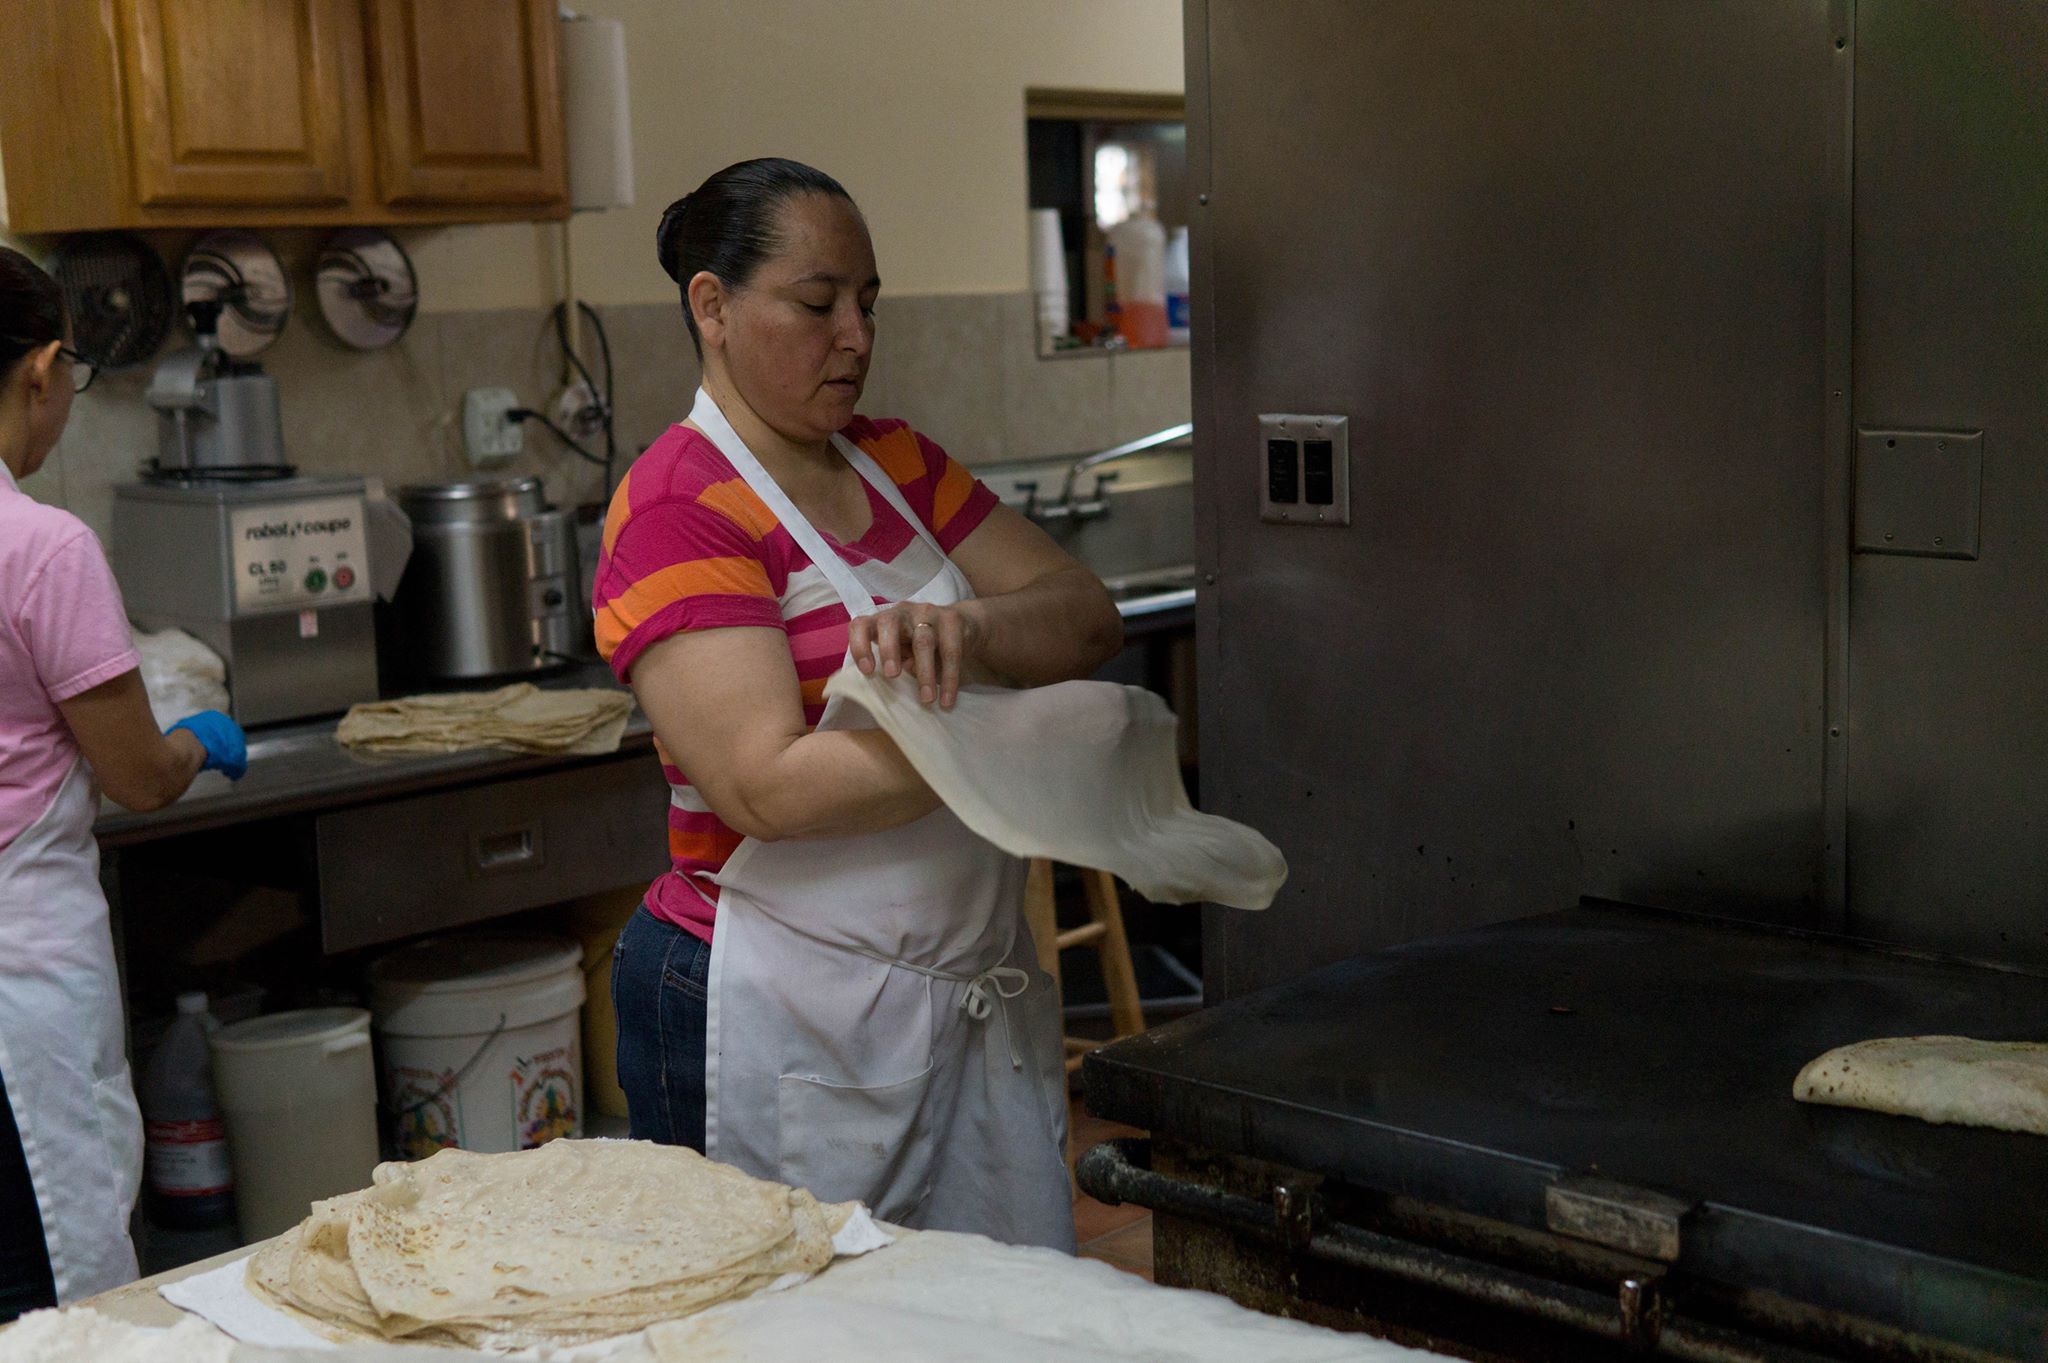 Tortilla making at St. Mary's Mexican Food (Credit: Brielle Farmer)